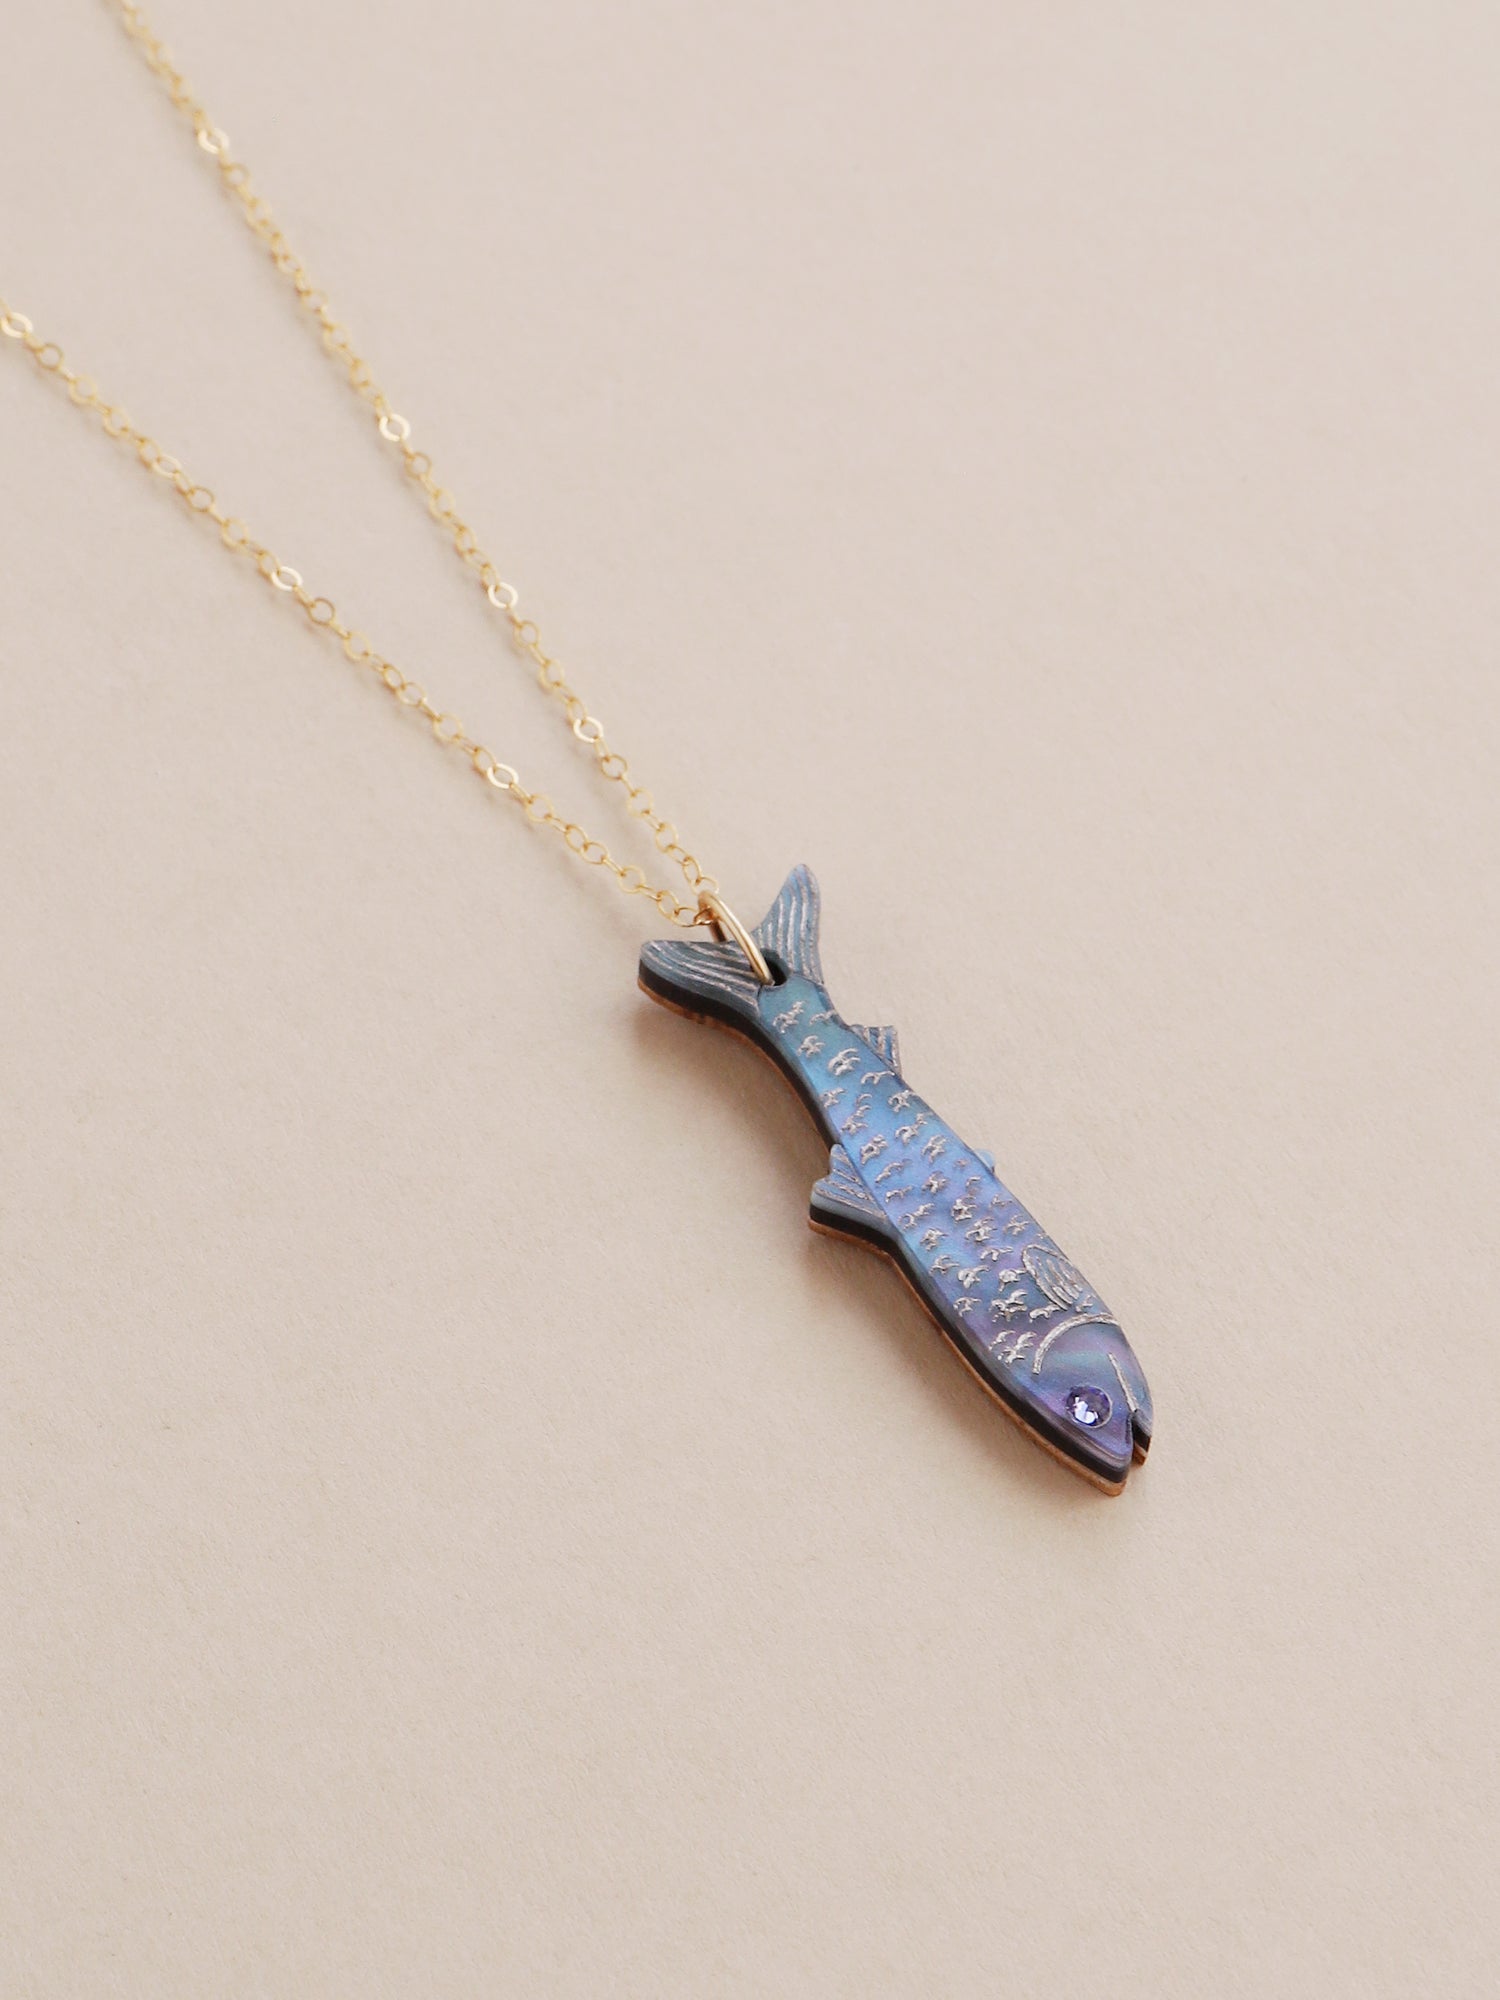 Anchovy Necklace